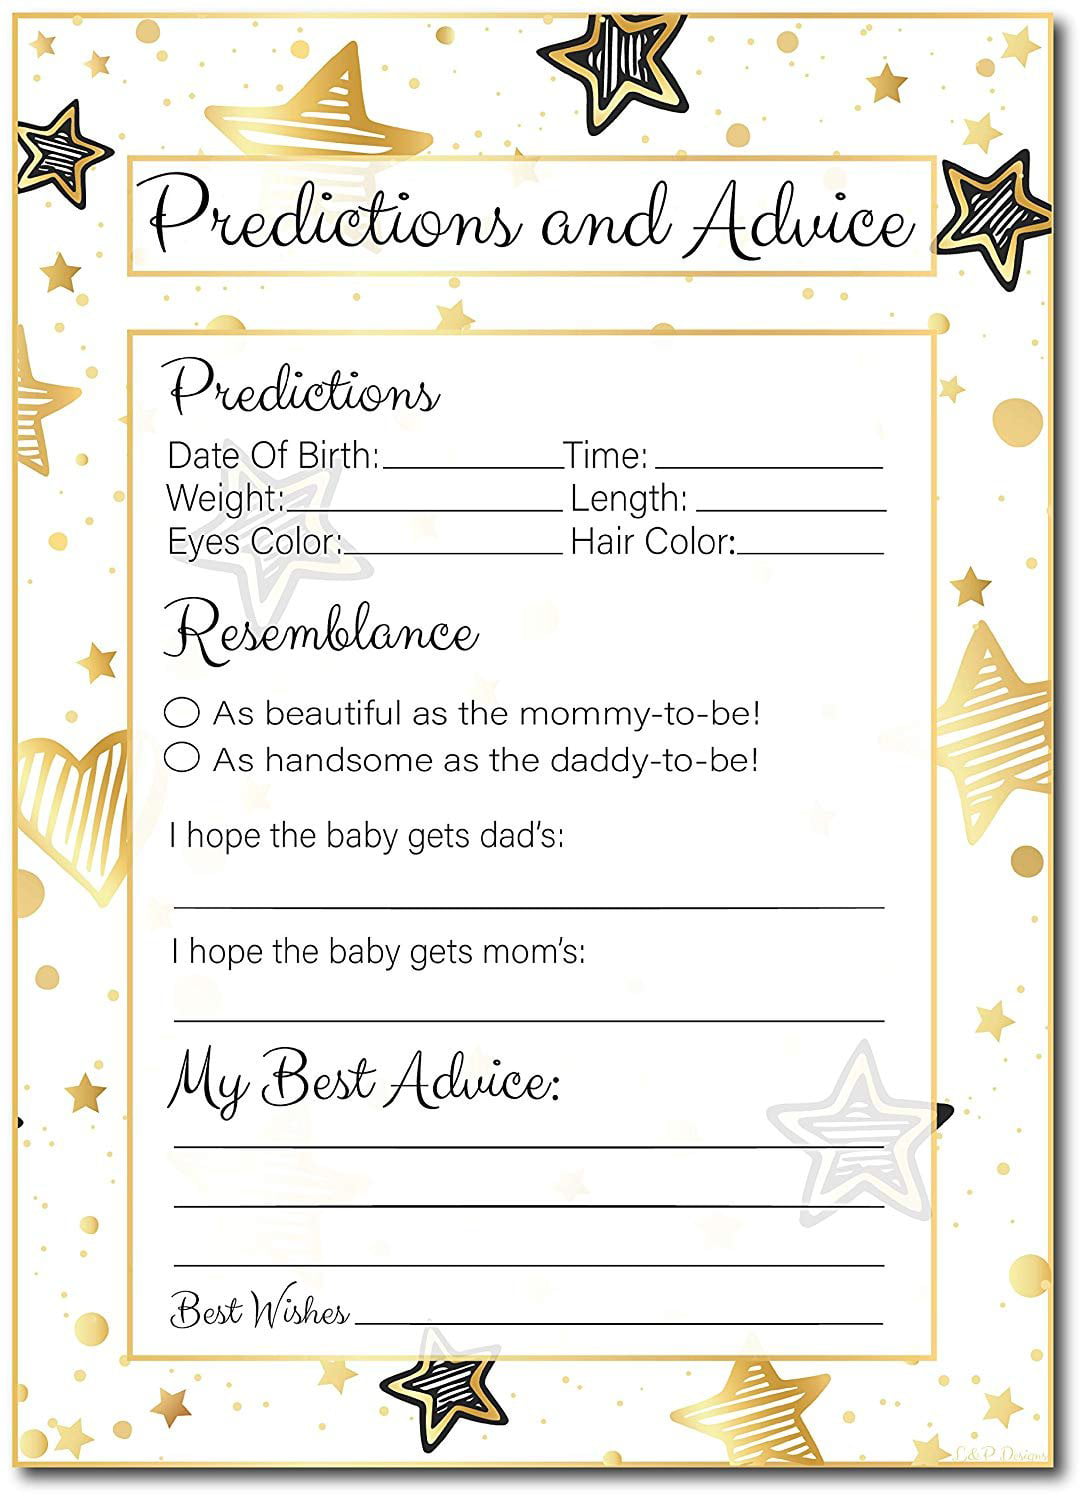 Wishes and Advice Cards Baby Prediction Cards 50 Baby Boy Shower Games 